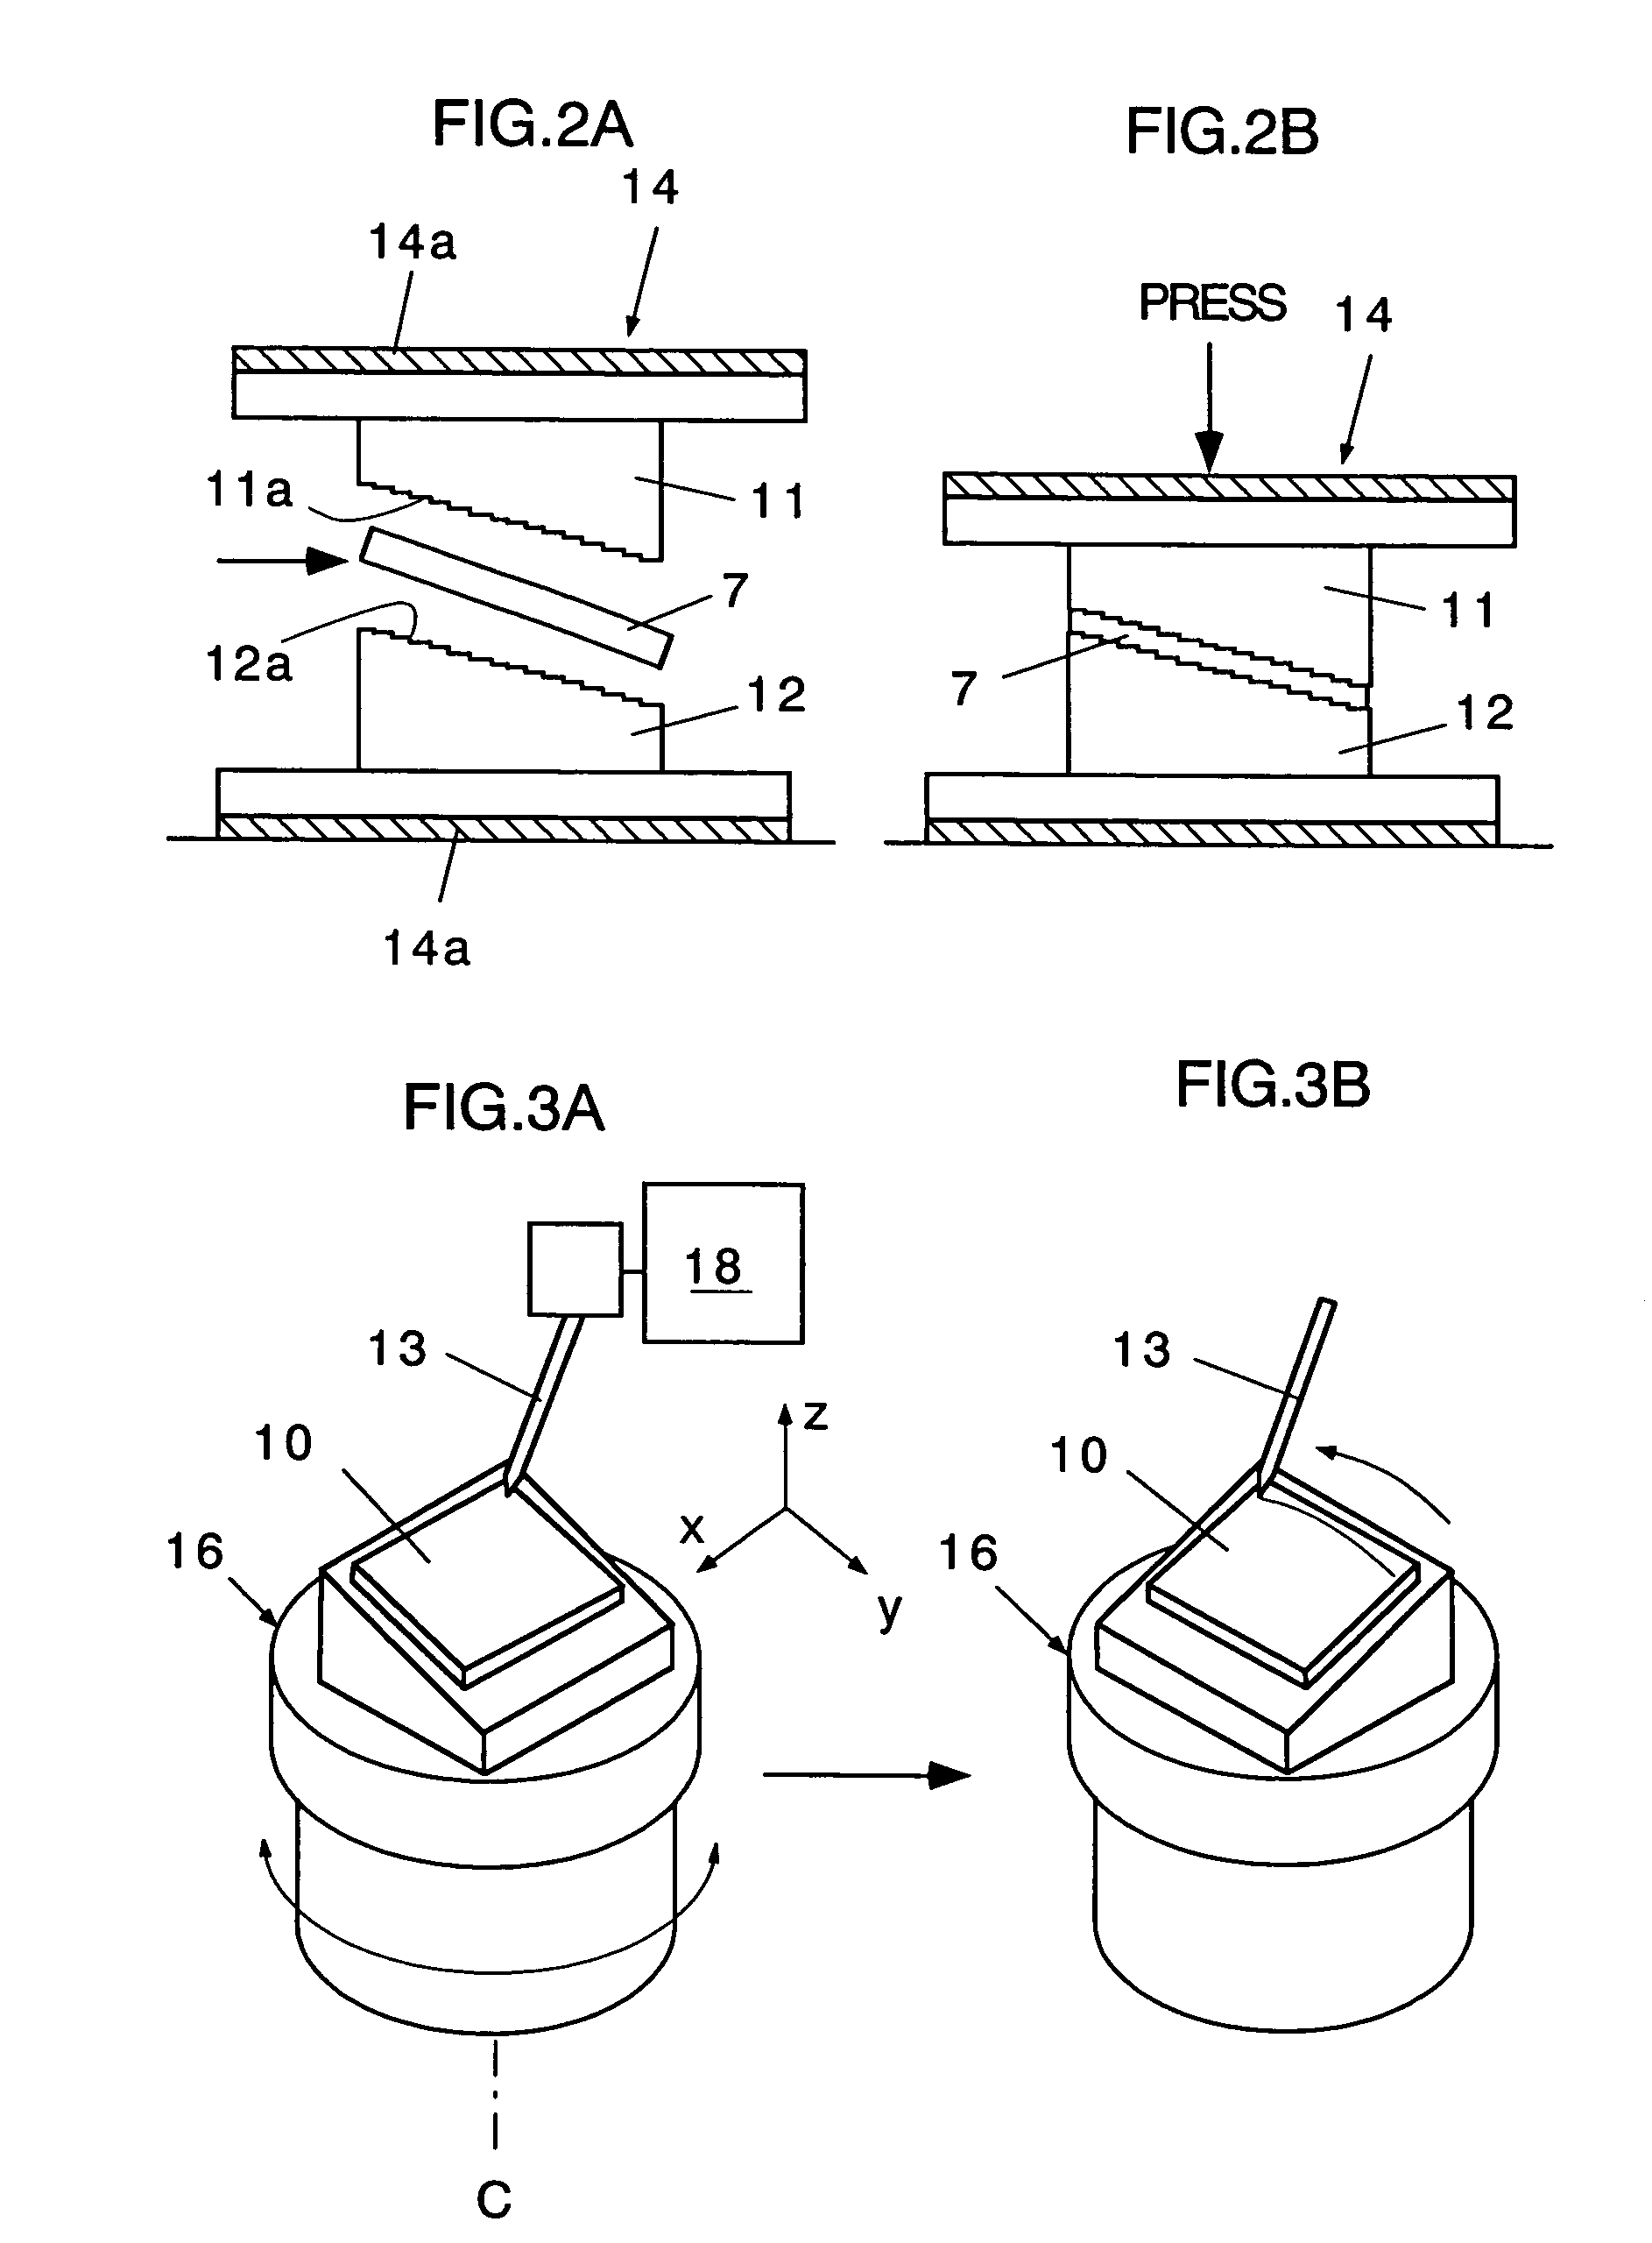 Method and apparatus for manufacturing large double-sided curved Fresnel lens